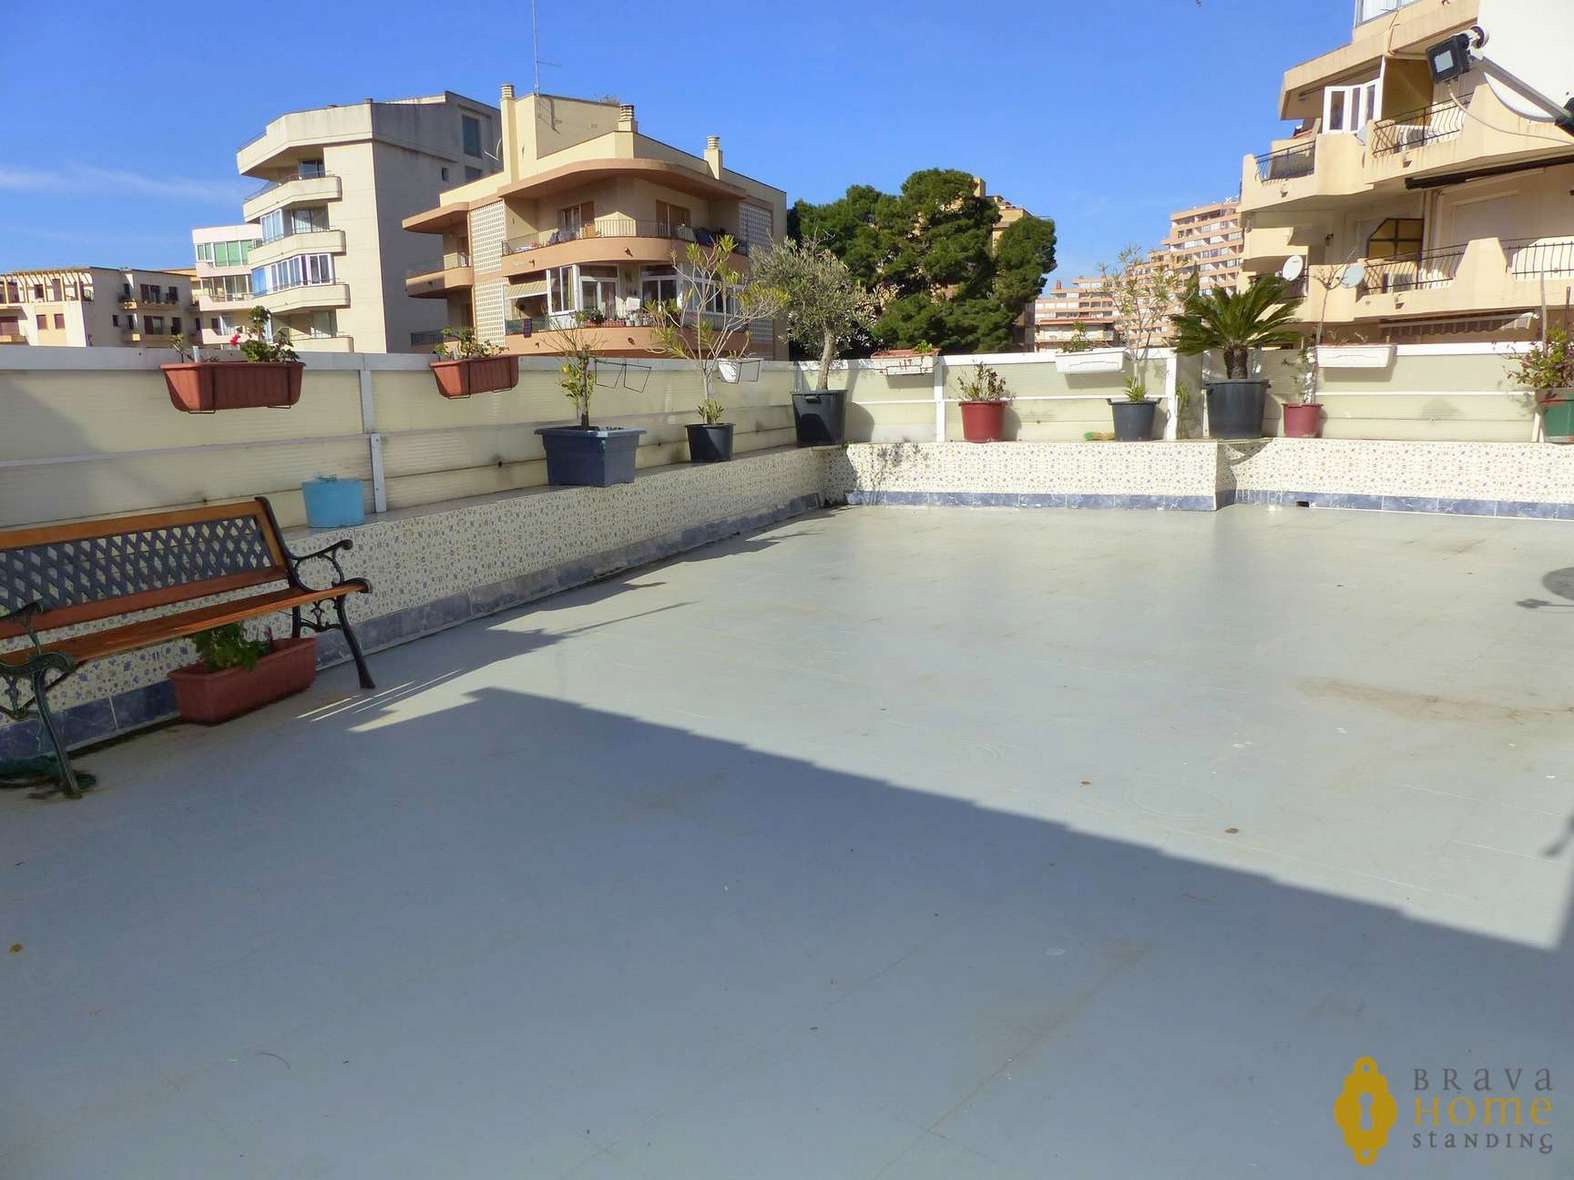 Apartment with 70m2 terrace at 100m from the beach of Rosas - Santa Margarita 